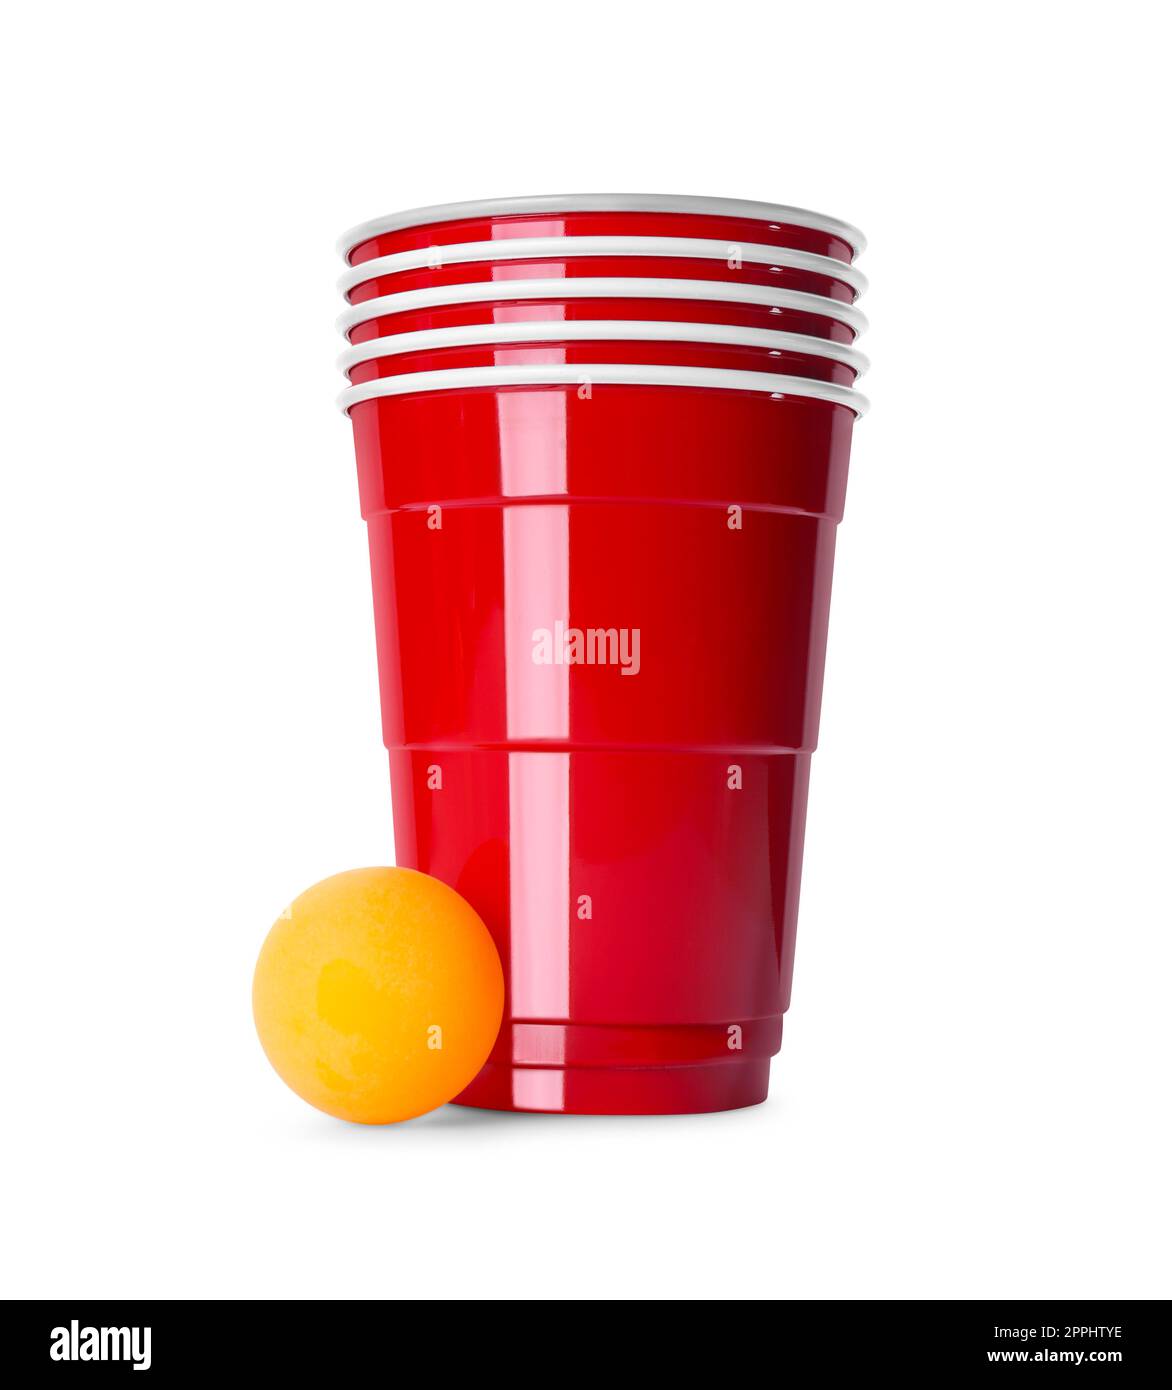 https://c8.alamy.com/comp/2PPHTYE/red-plastic-cups-and-ball-for-beer-pong-on-white-background-2PPHTYE.jpg